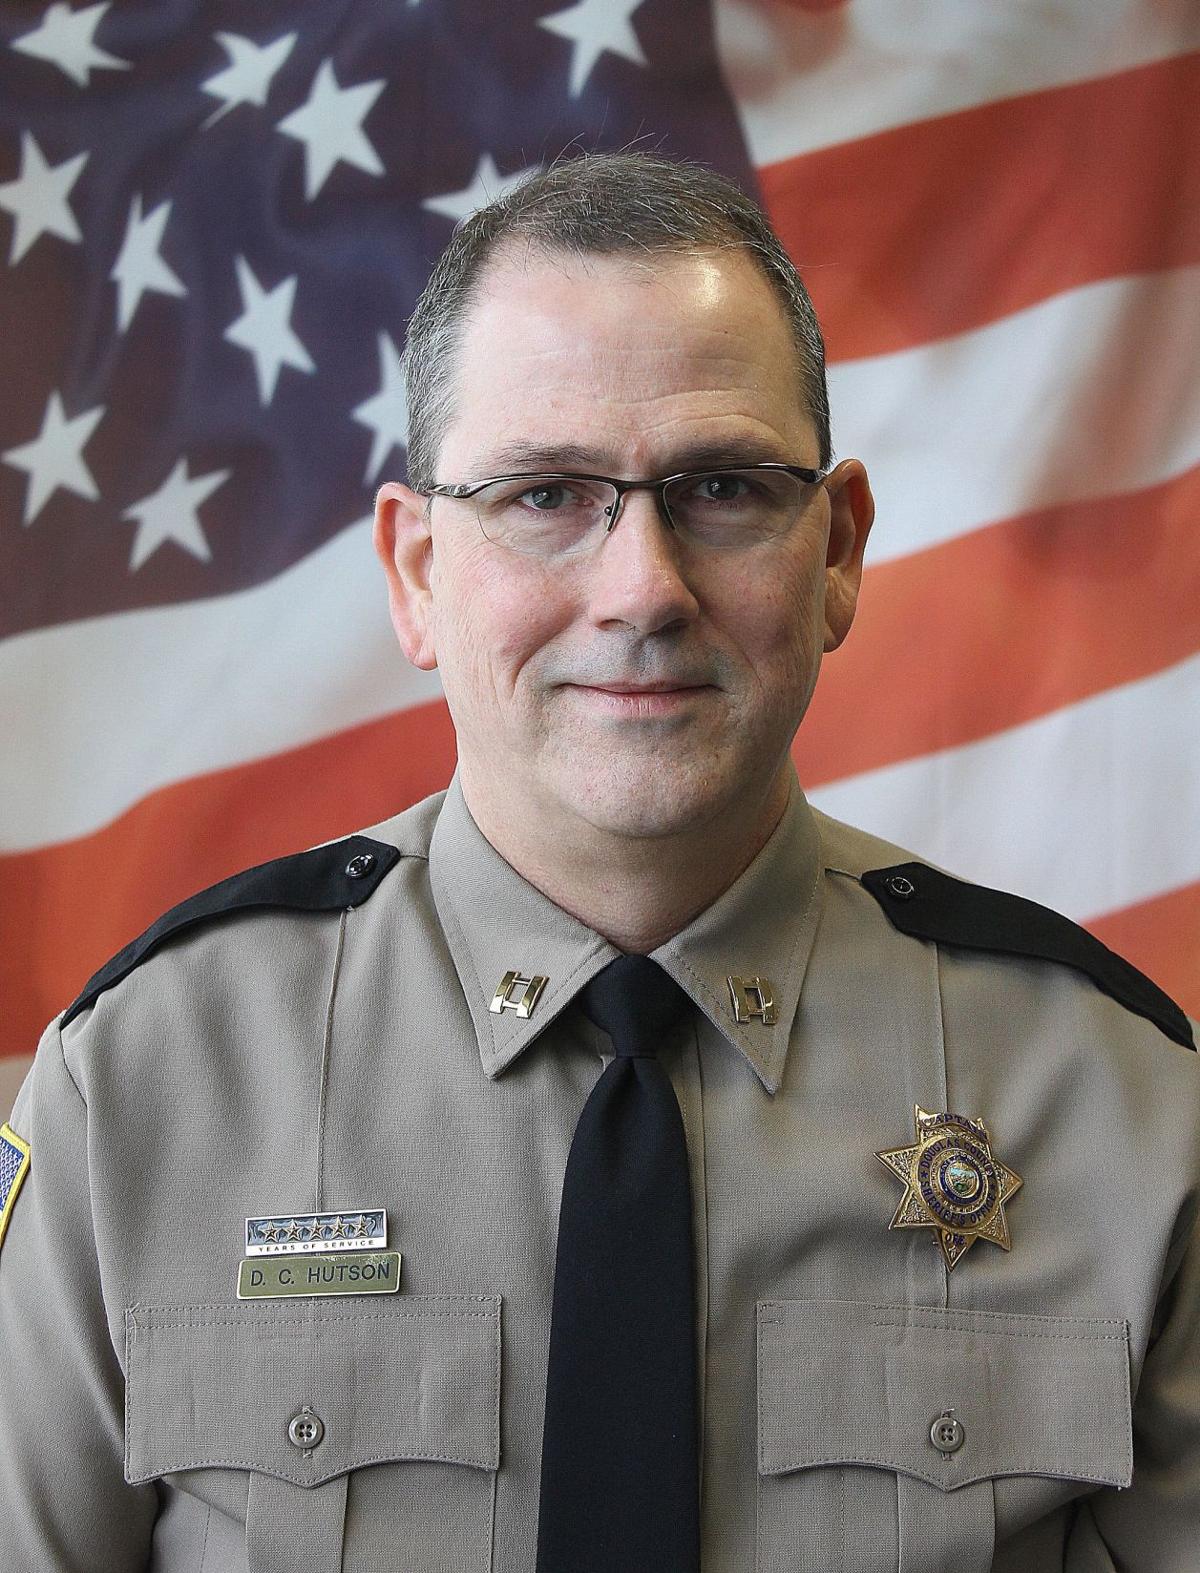 Dwes Hutson retires from sheriff's office | Public Safety | nrtoday.com